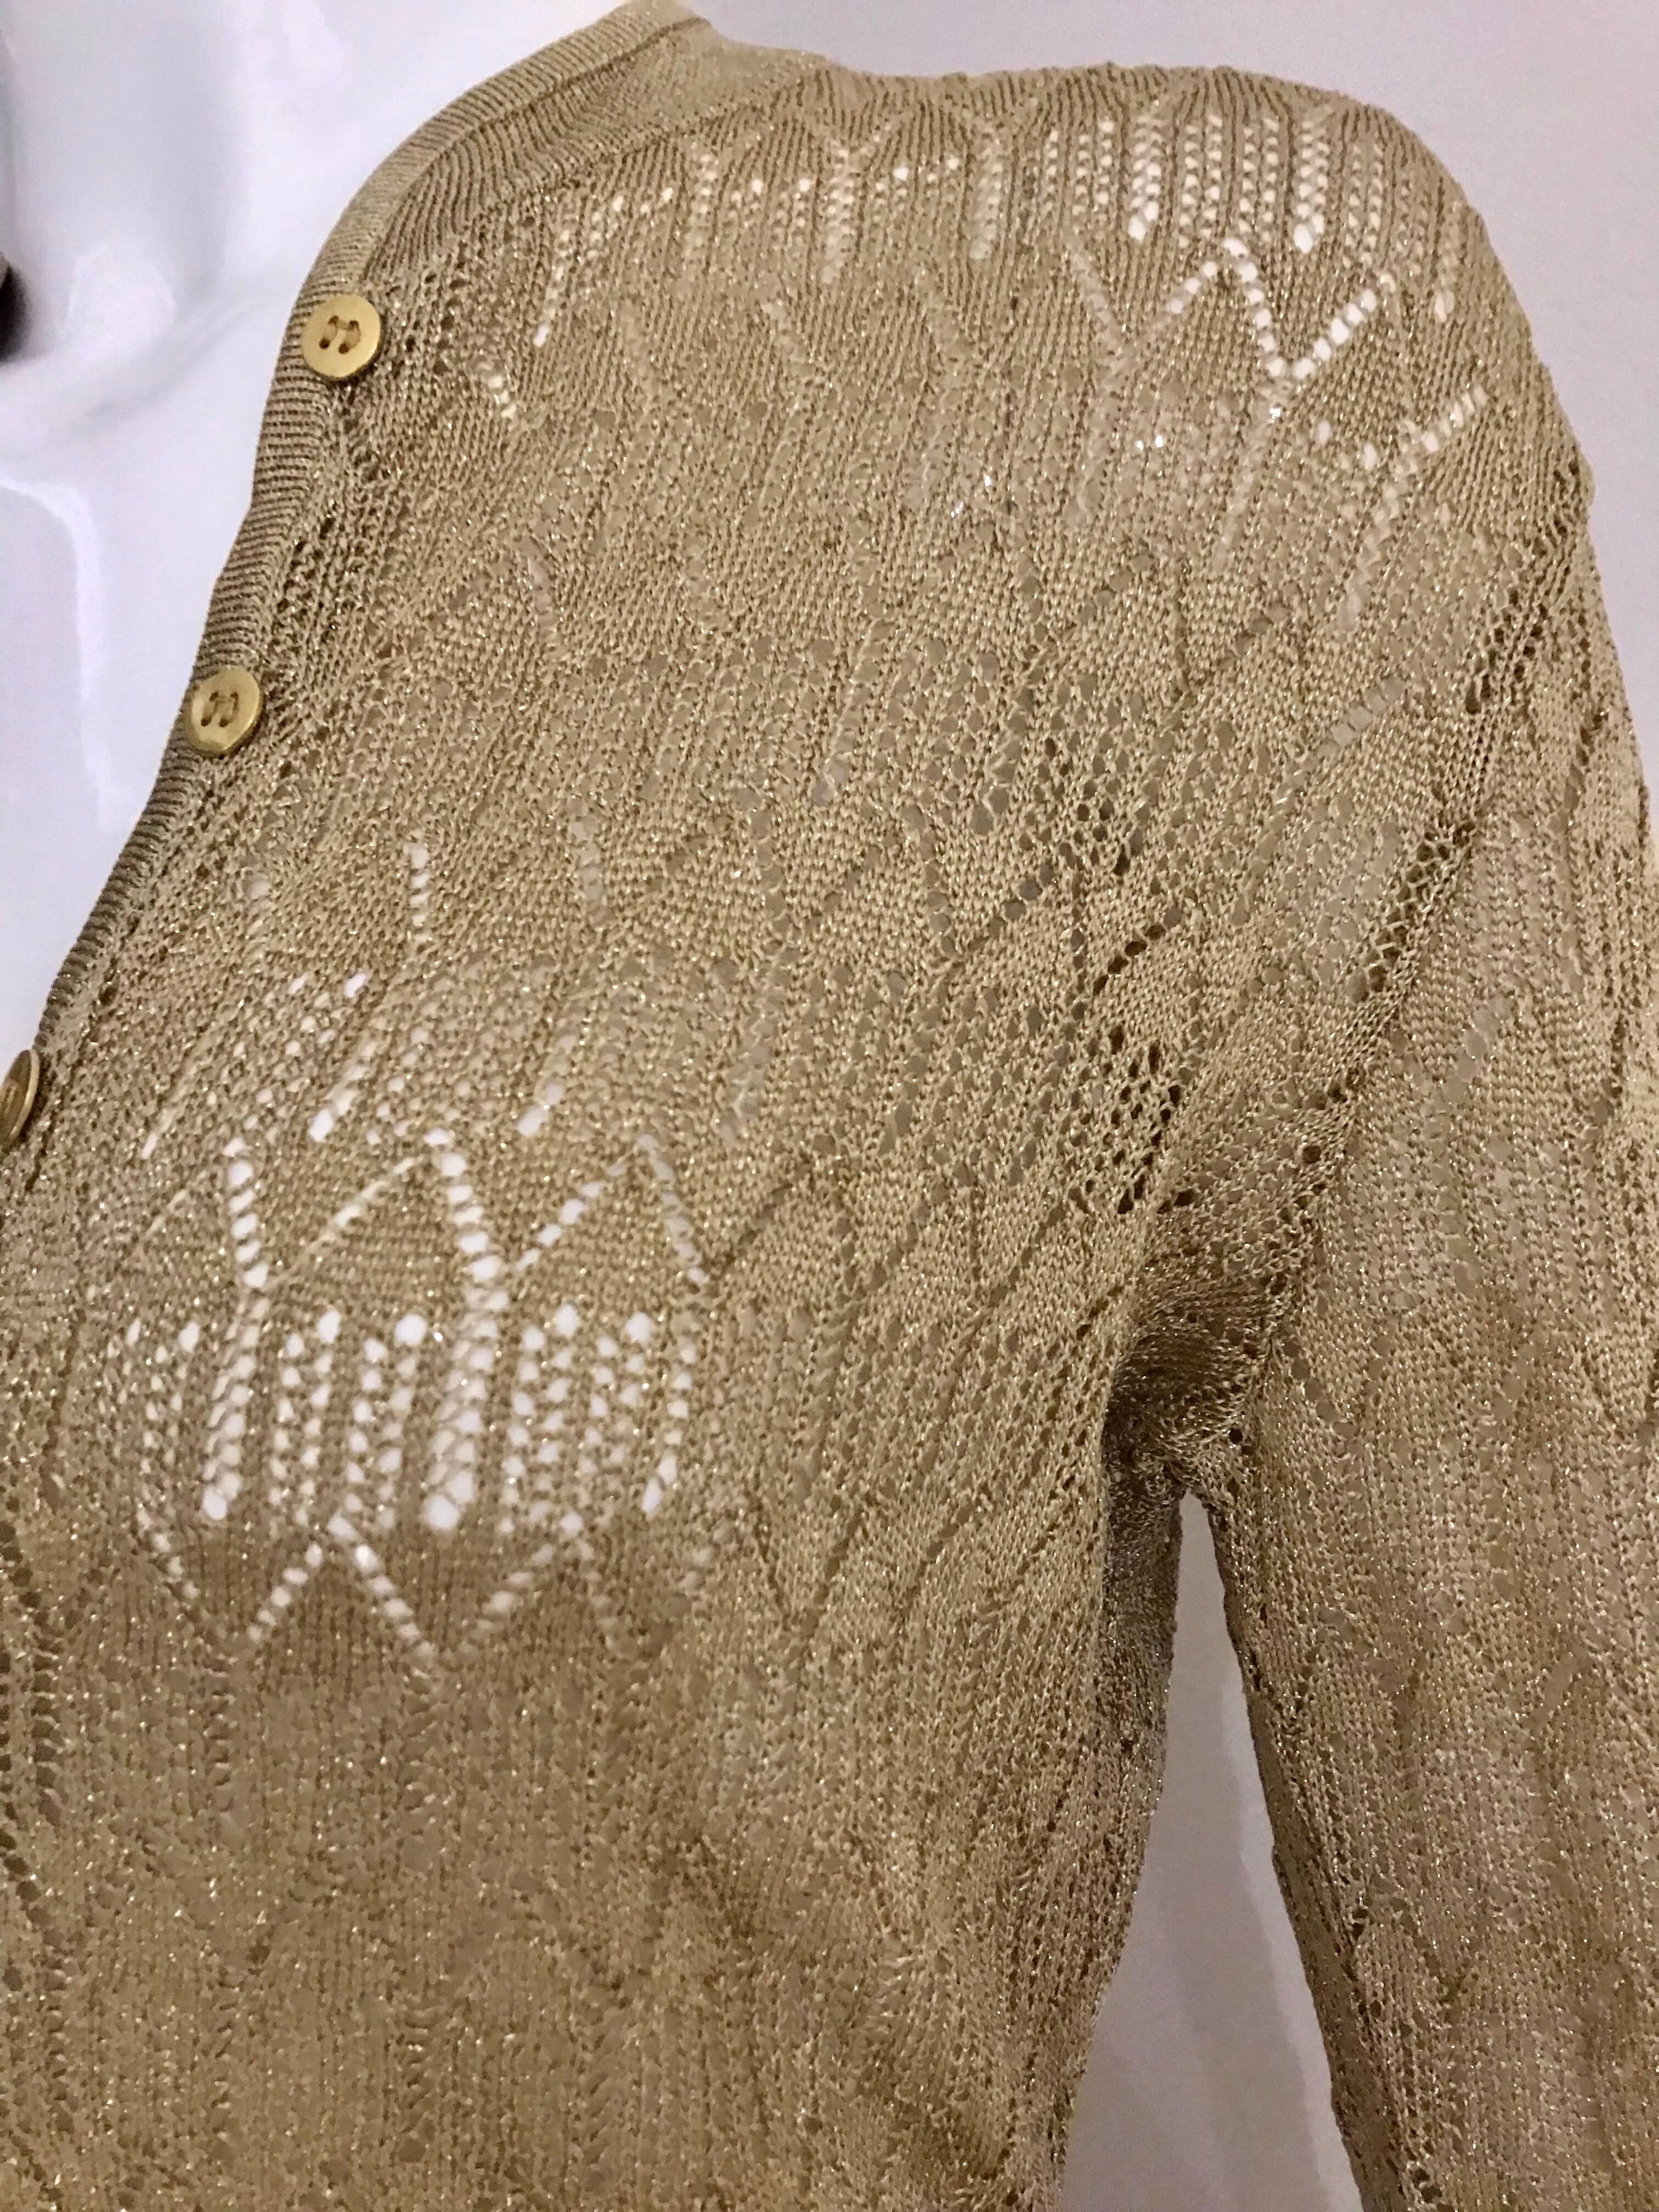 Gold metallic knit Christian Dior by John Galliano Cardigan and fitted long skirt set.
Fit Size 4
